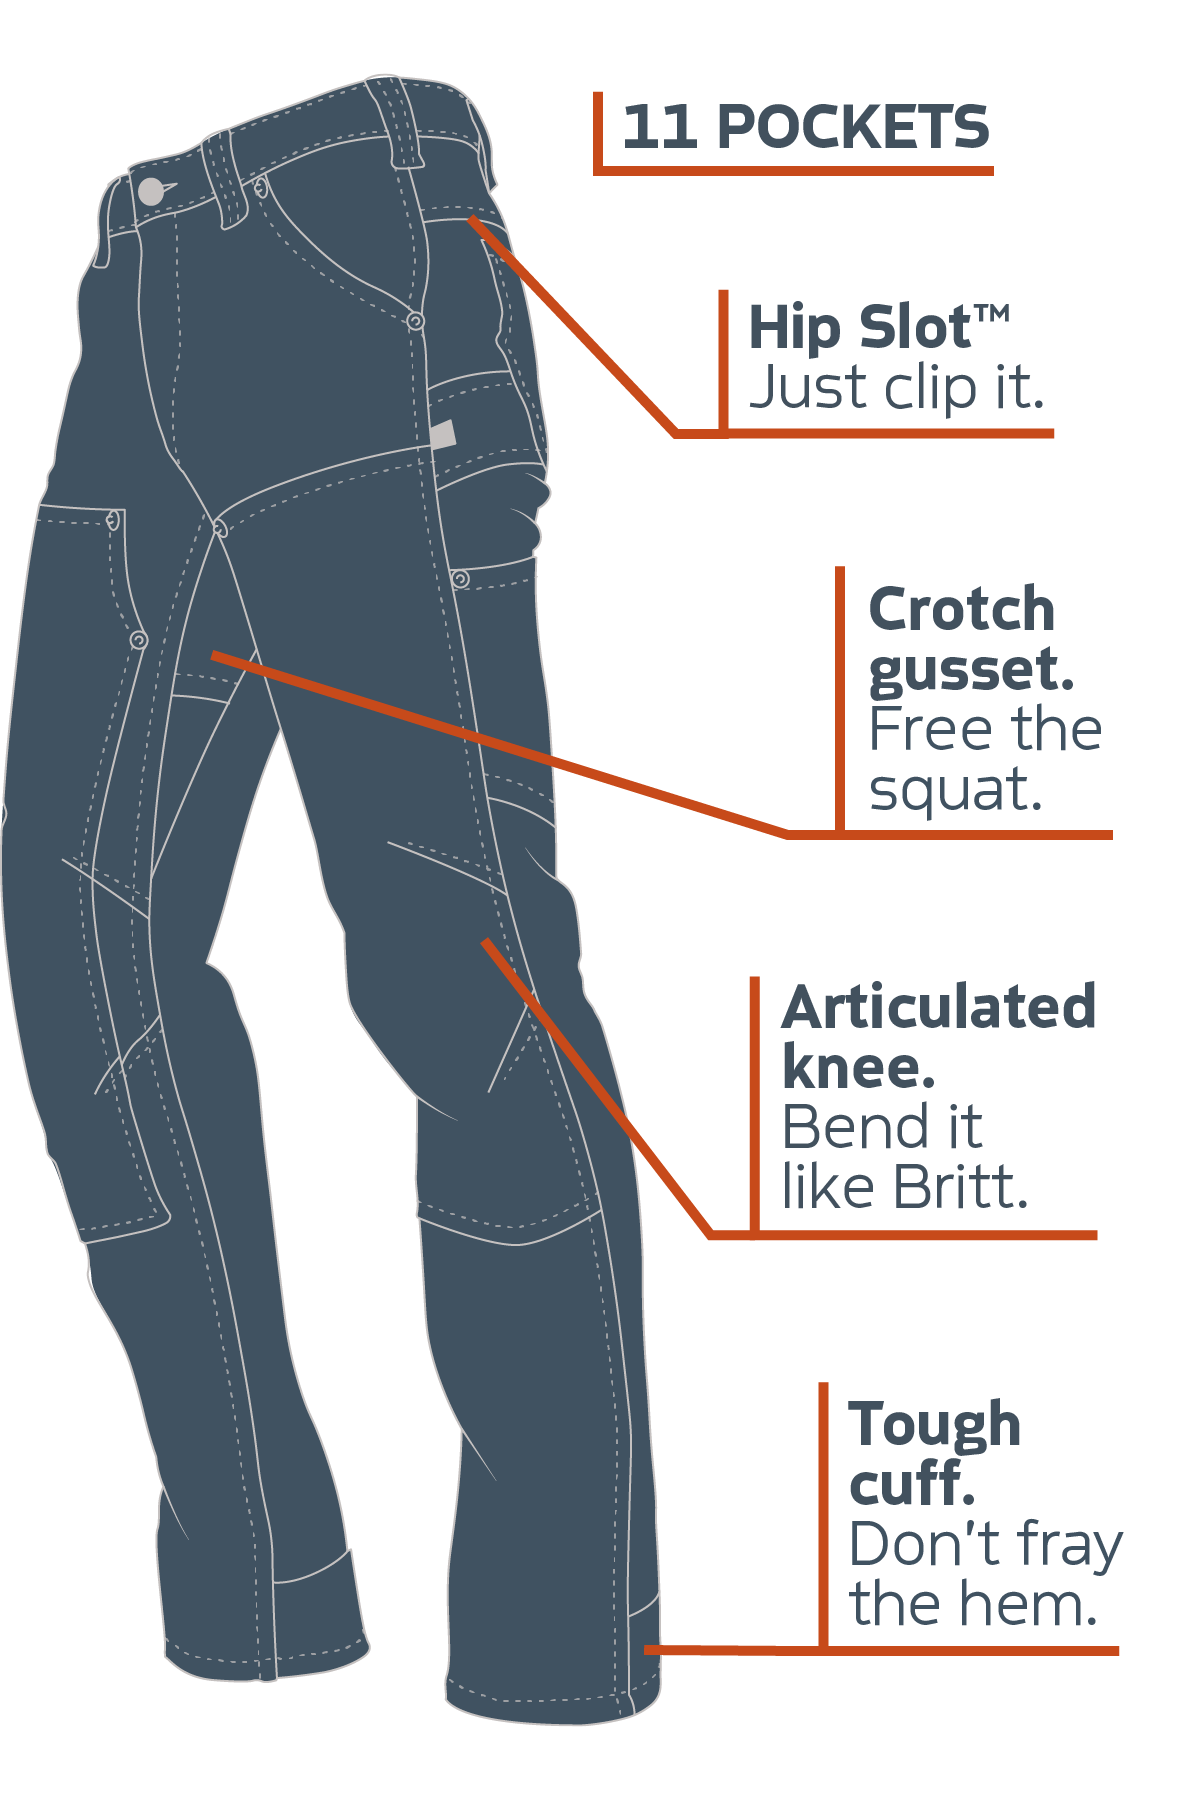 Britt Utility Graphic: 11 pockets,Tool Loop, Zip pocket, Crotch Gusset, Reinforced knee, knee slot, and tough cuff.